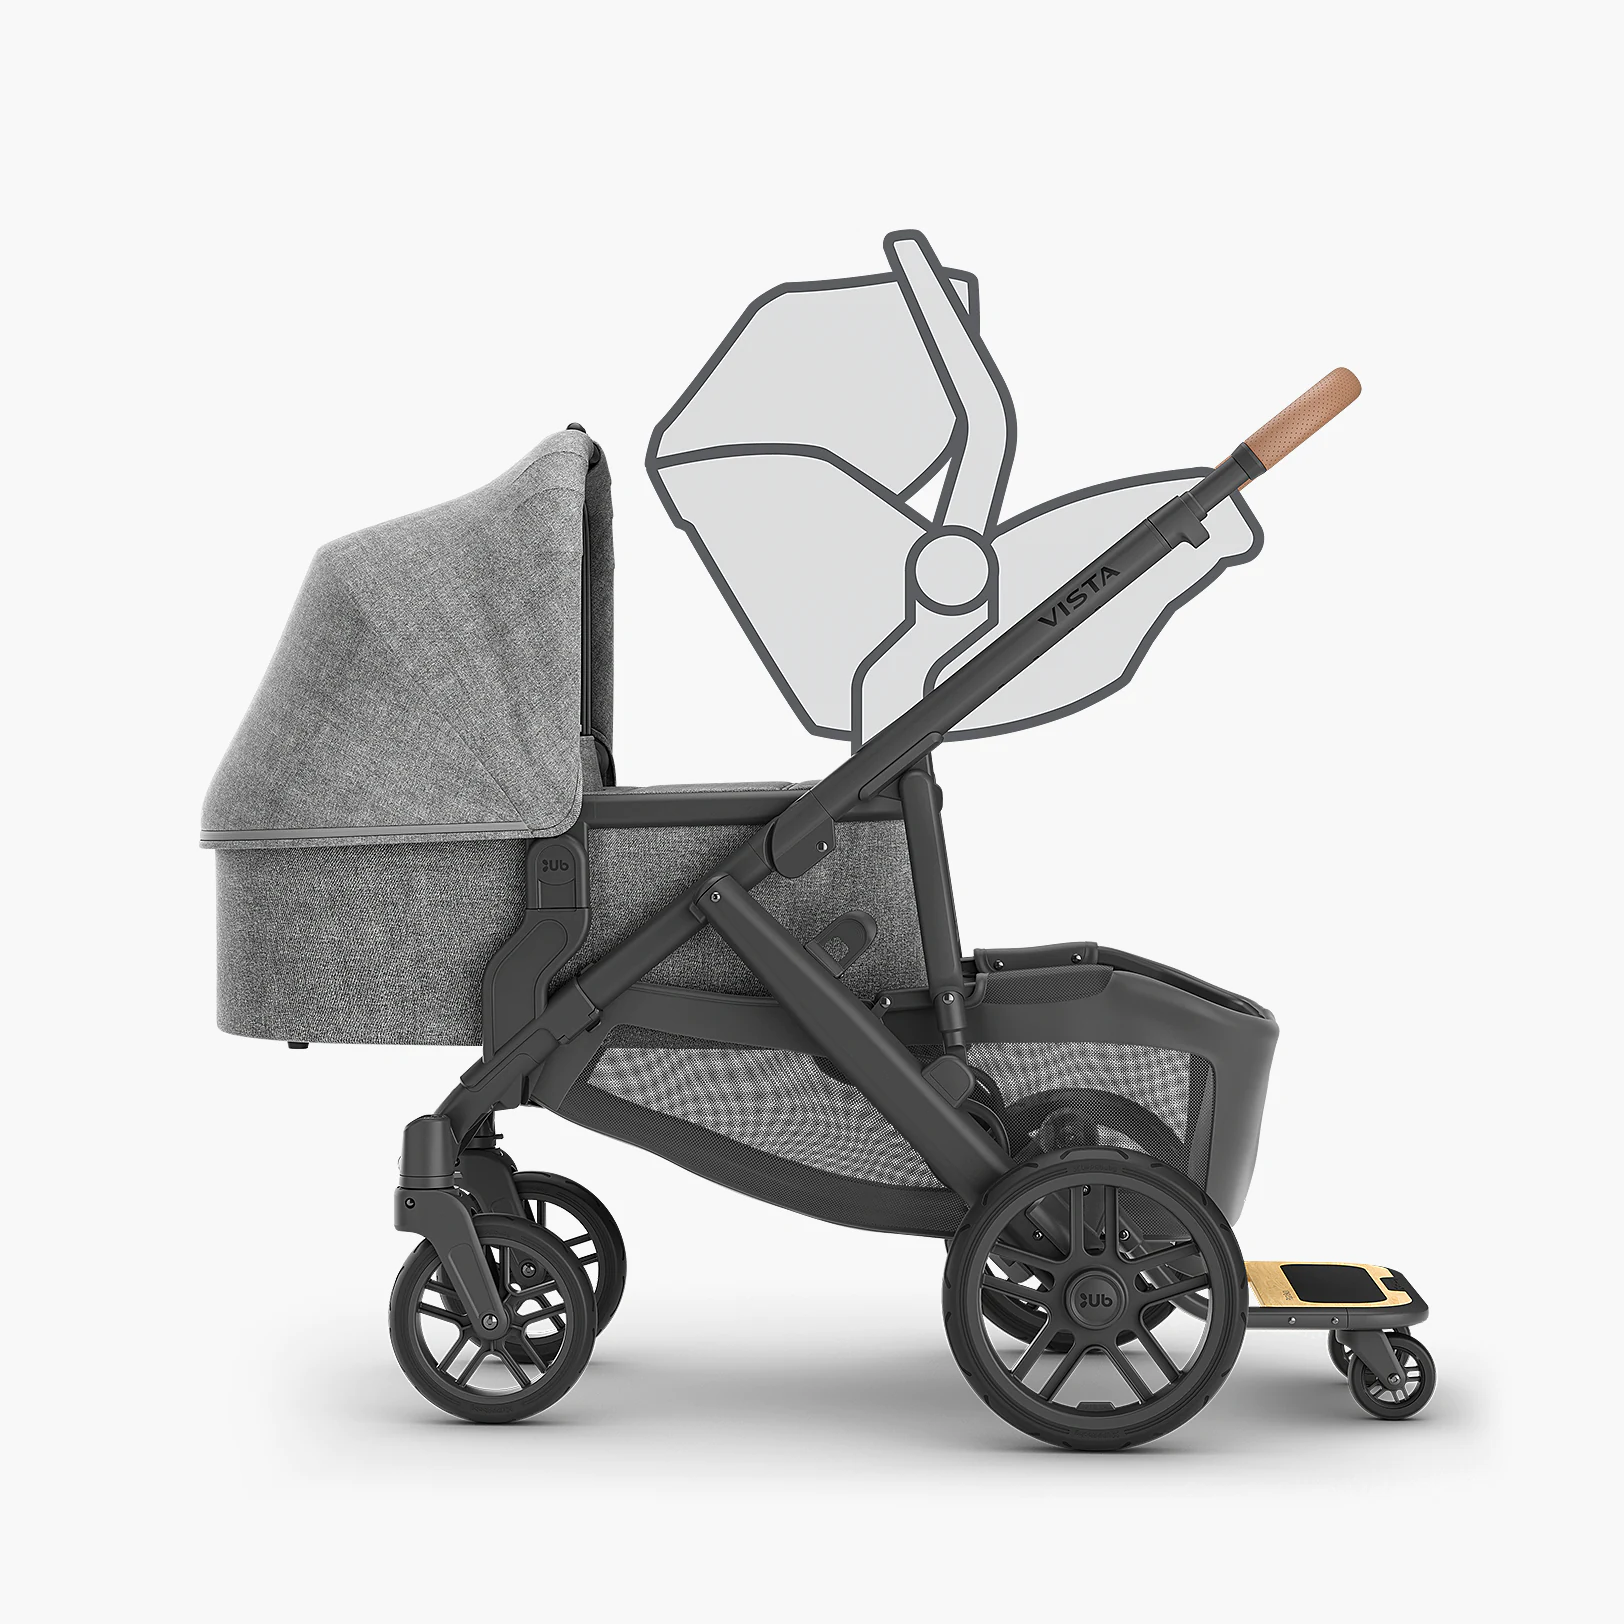 Vista V2 with car seat and adapters (upper), Bassinet with adapters (lower), and PiggyBack